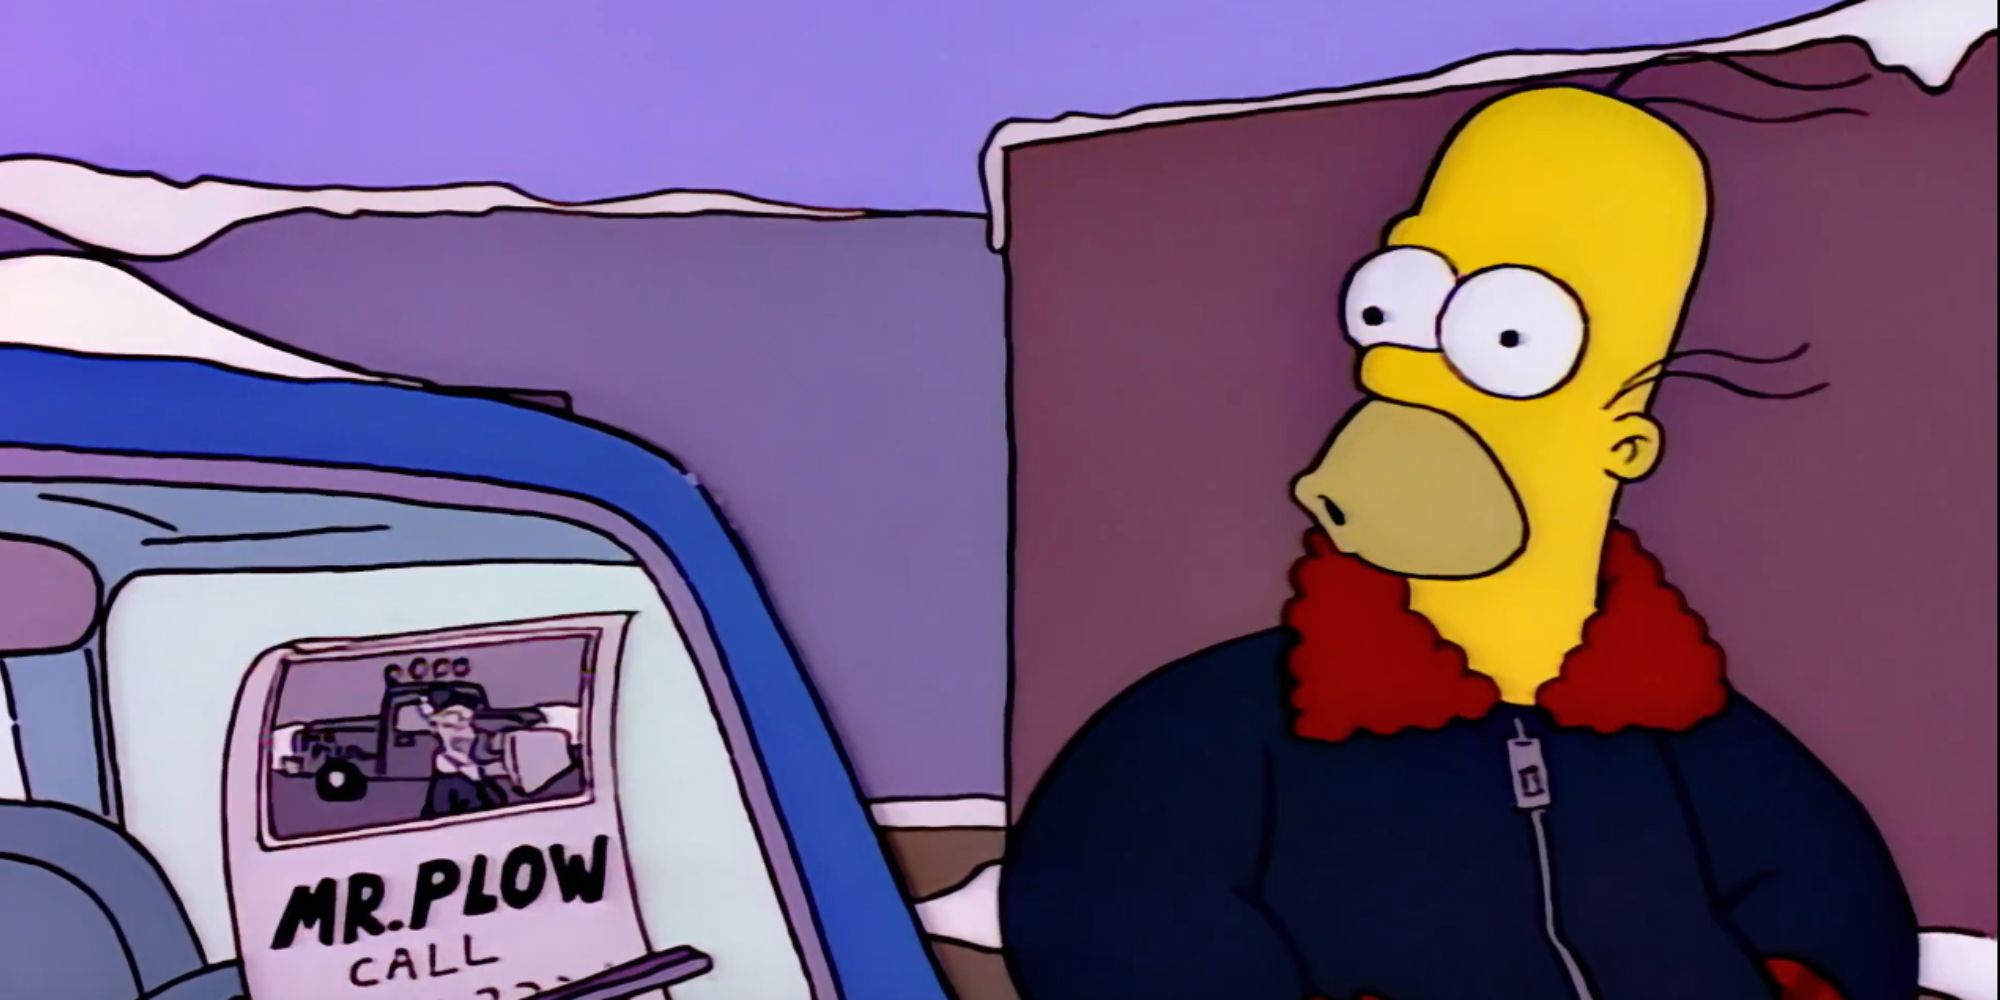 Homer in the Mr. Plow episode of The Simpsons